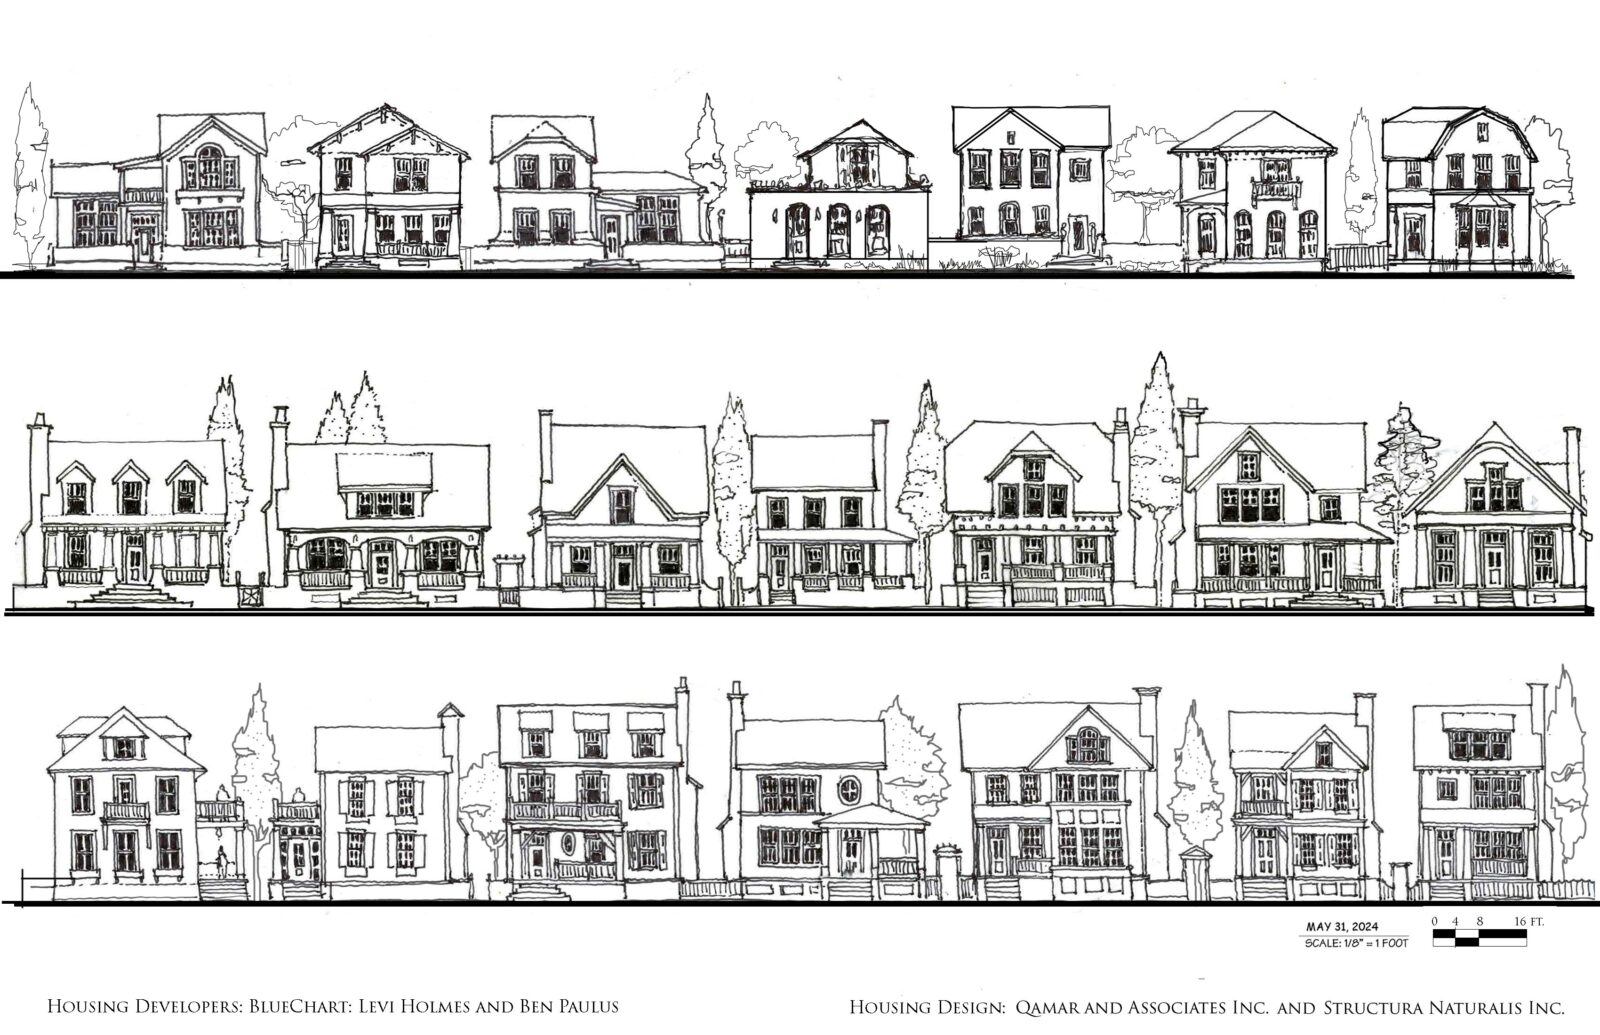 BlueChart Homes design library of single-family residential homes proposed for Vista Field.